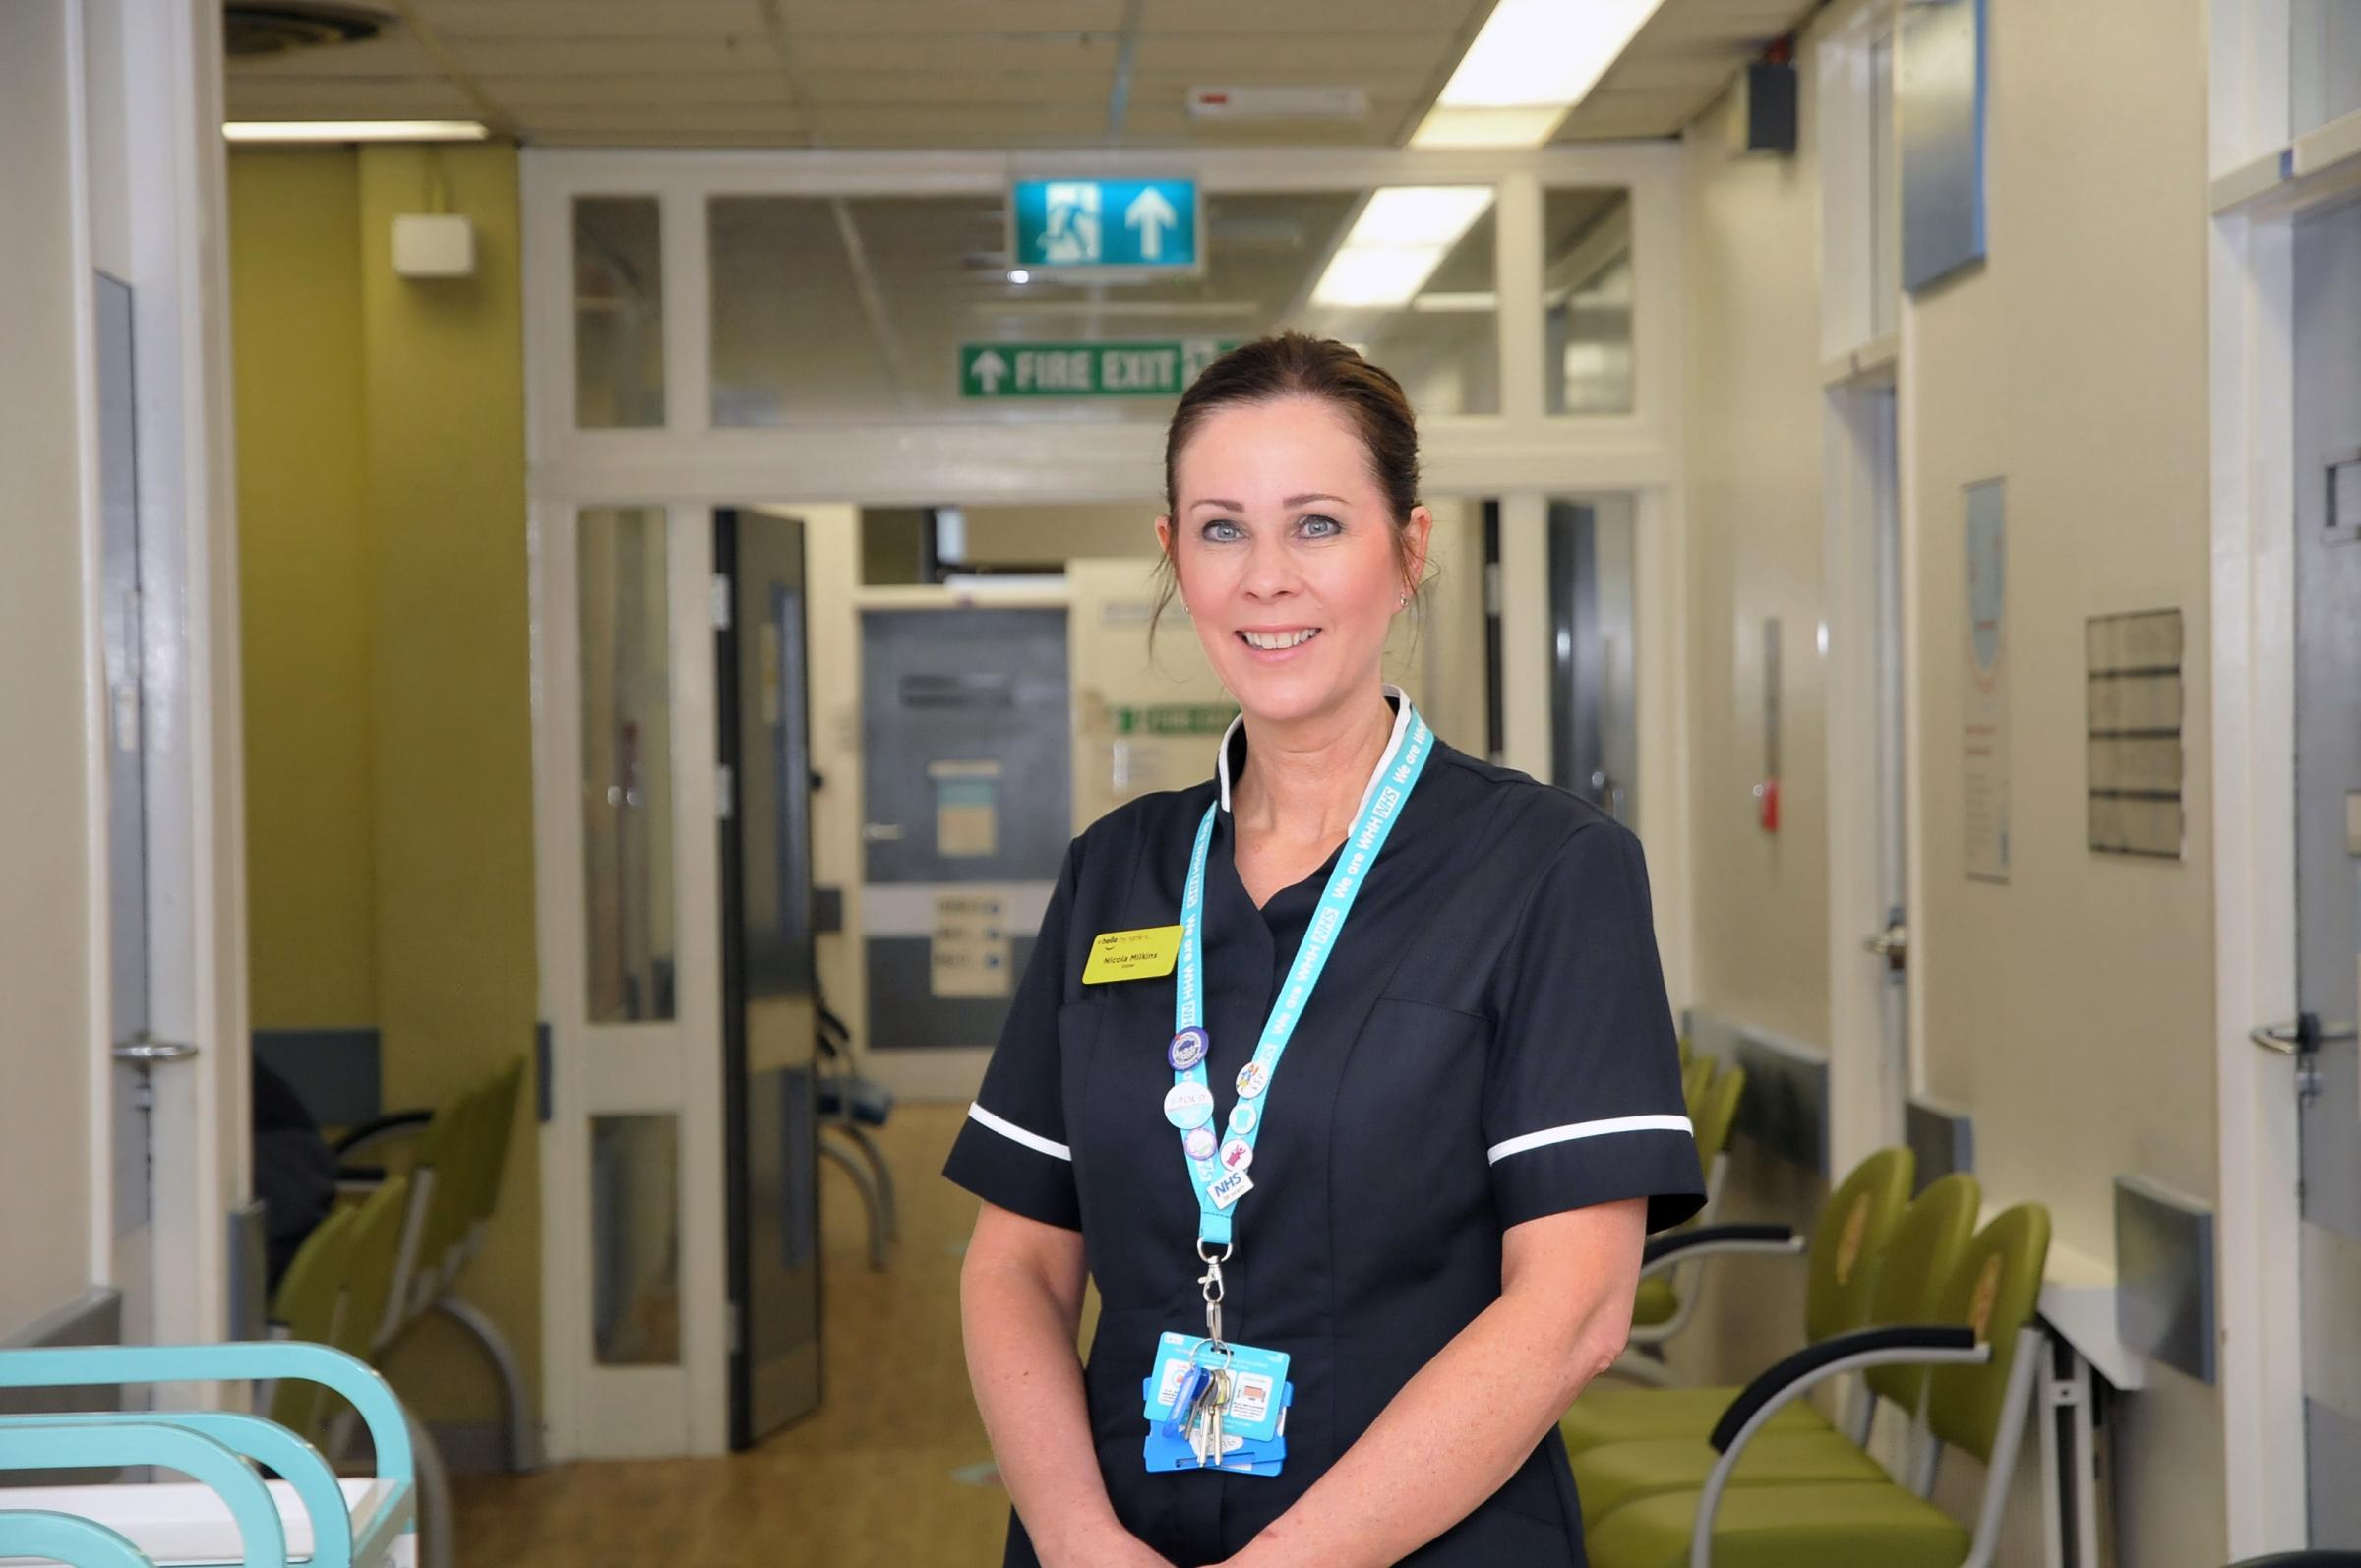 Nicola Milkins, acting matron for clinical support services at Warrington and Halton hospitals